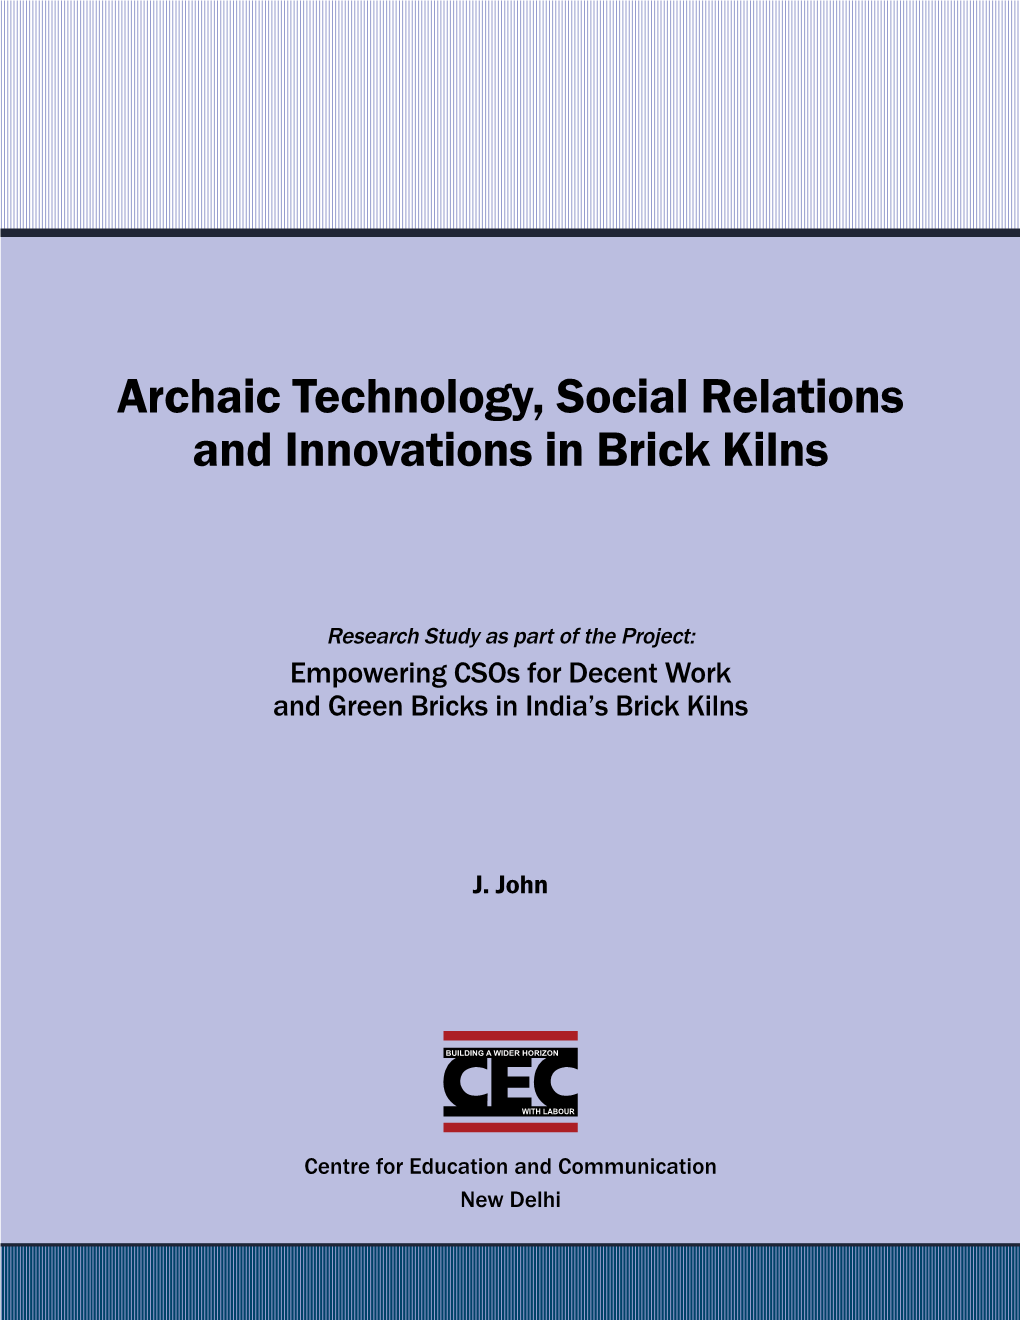 Archaic Technology, Social Relations and Innovations in Brick Kilns